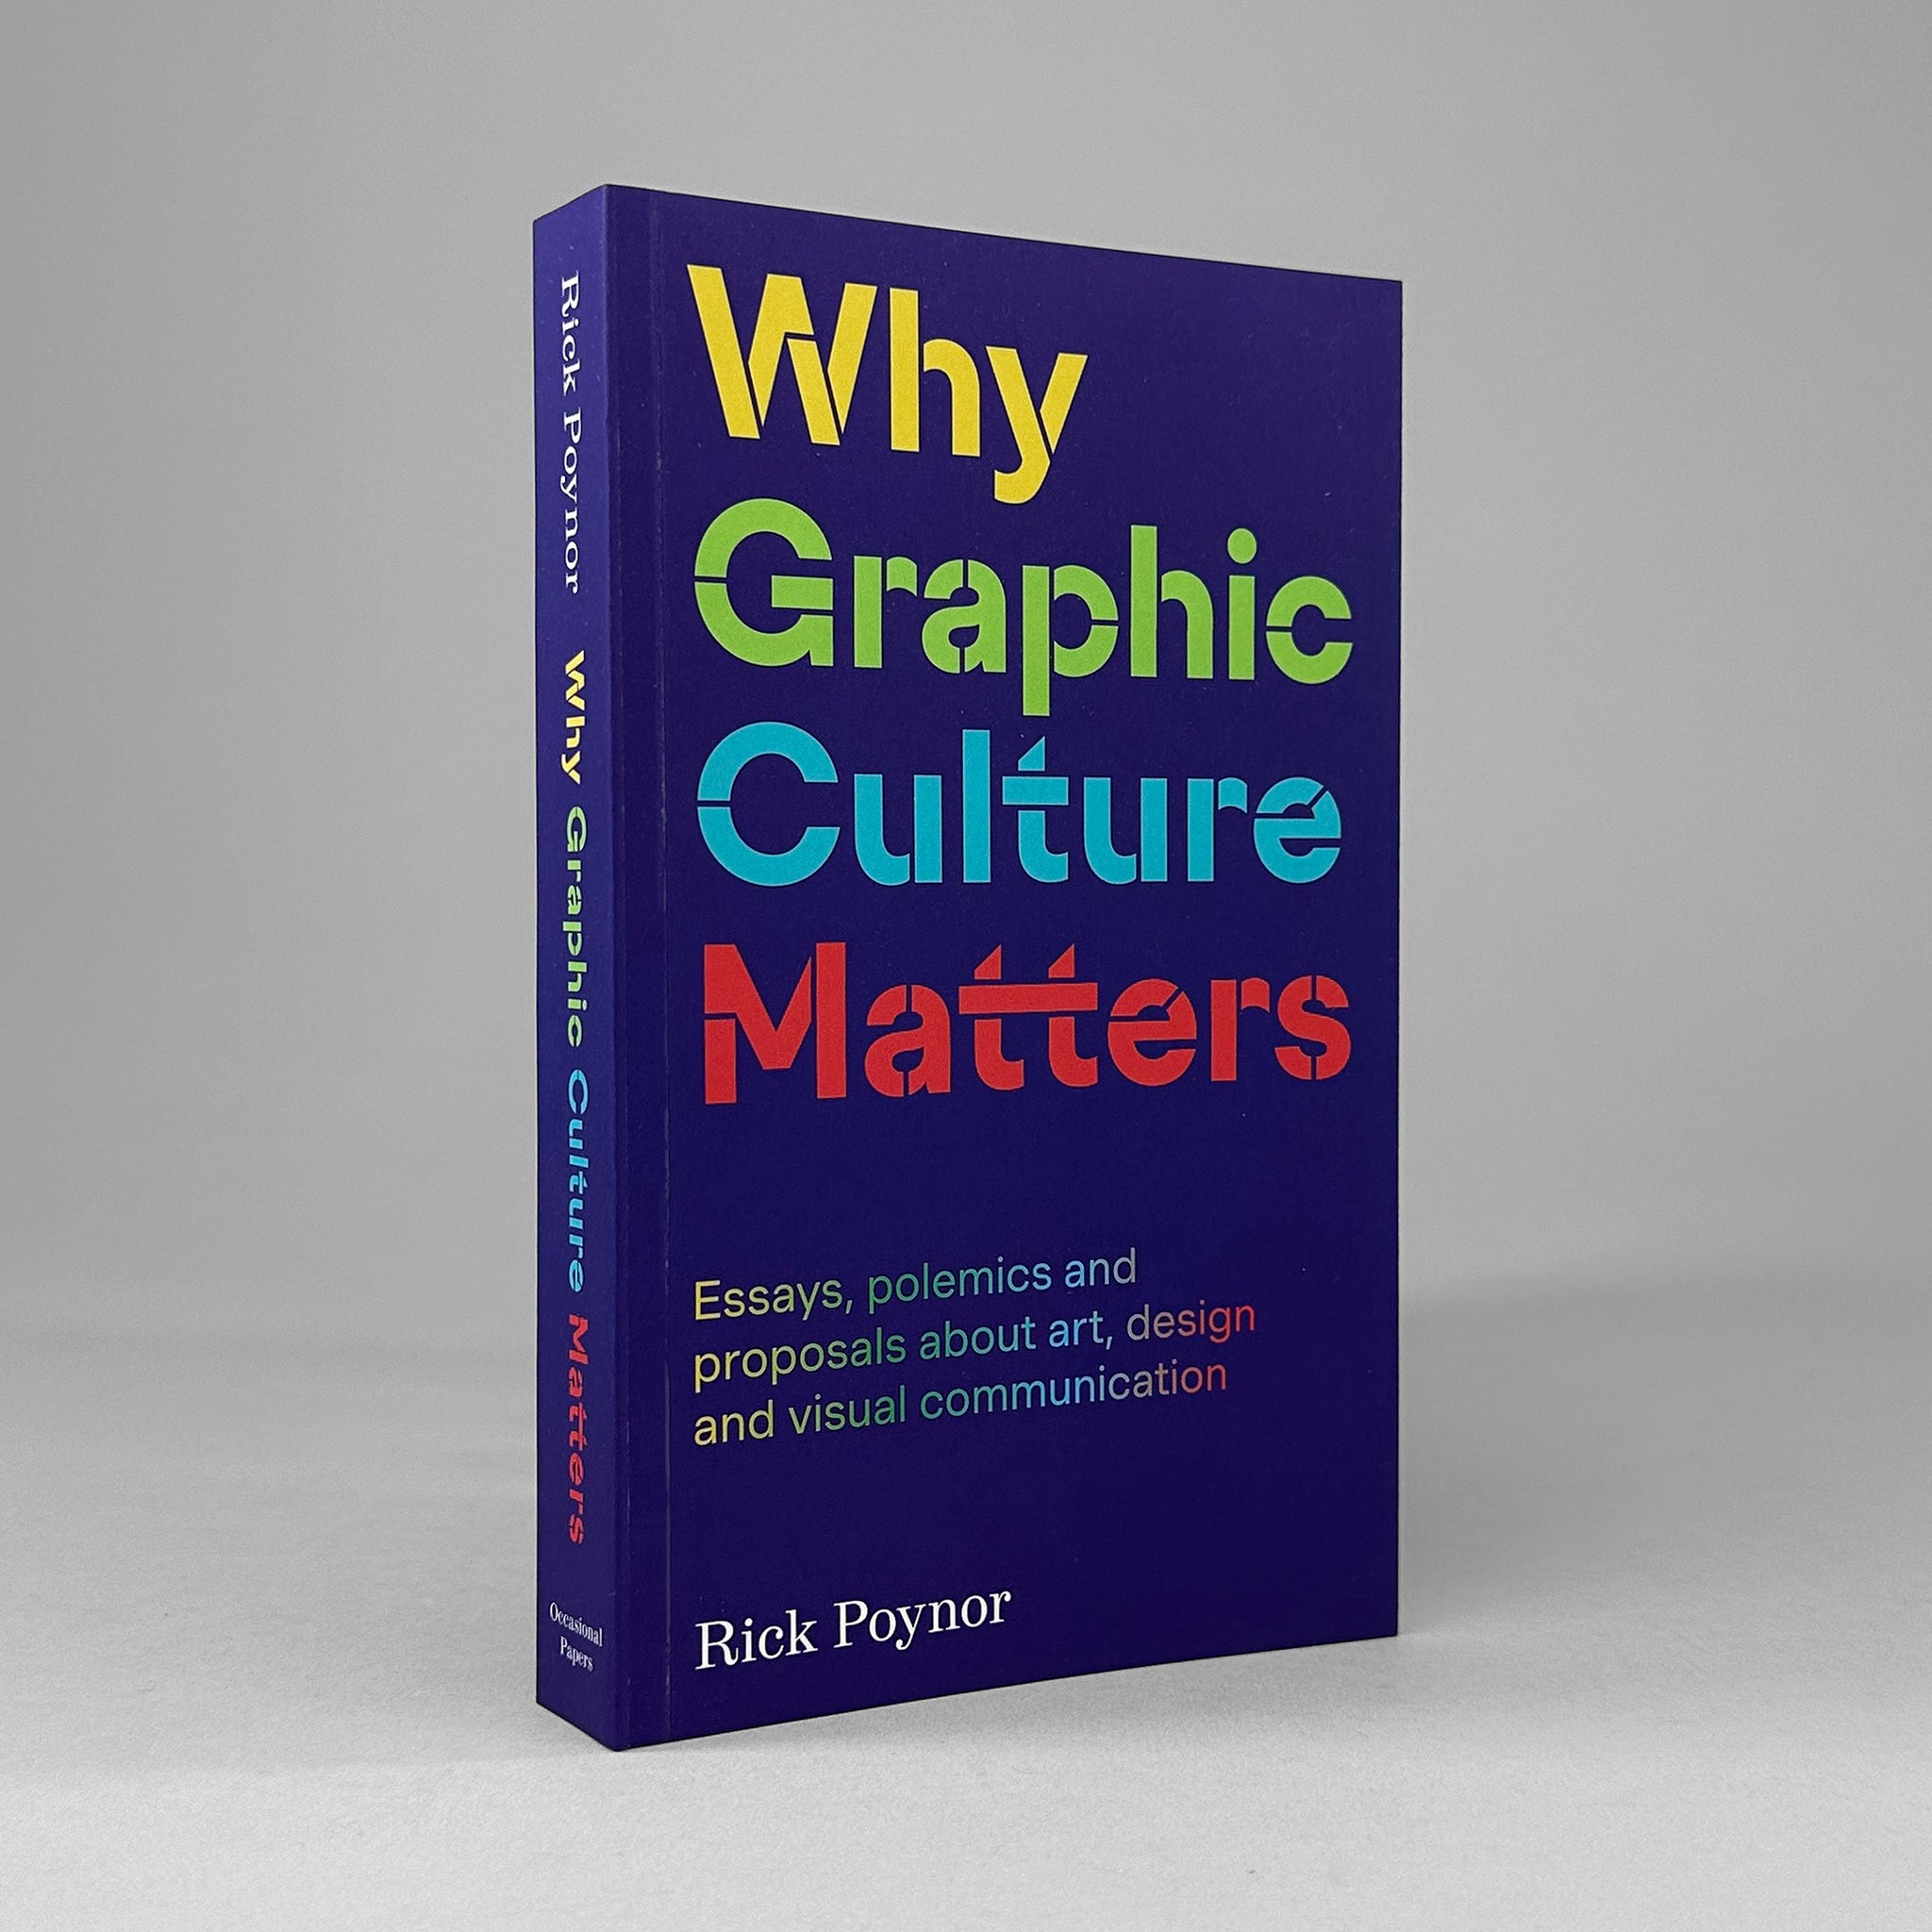 Why Graphic Culture Matters by Rick Poyner